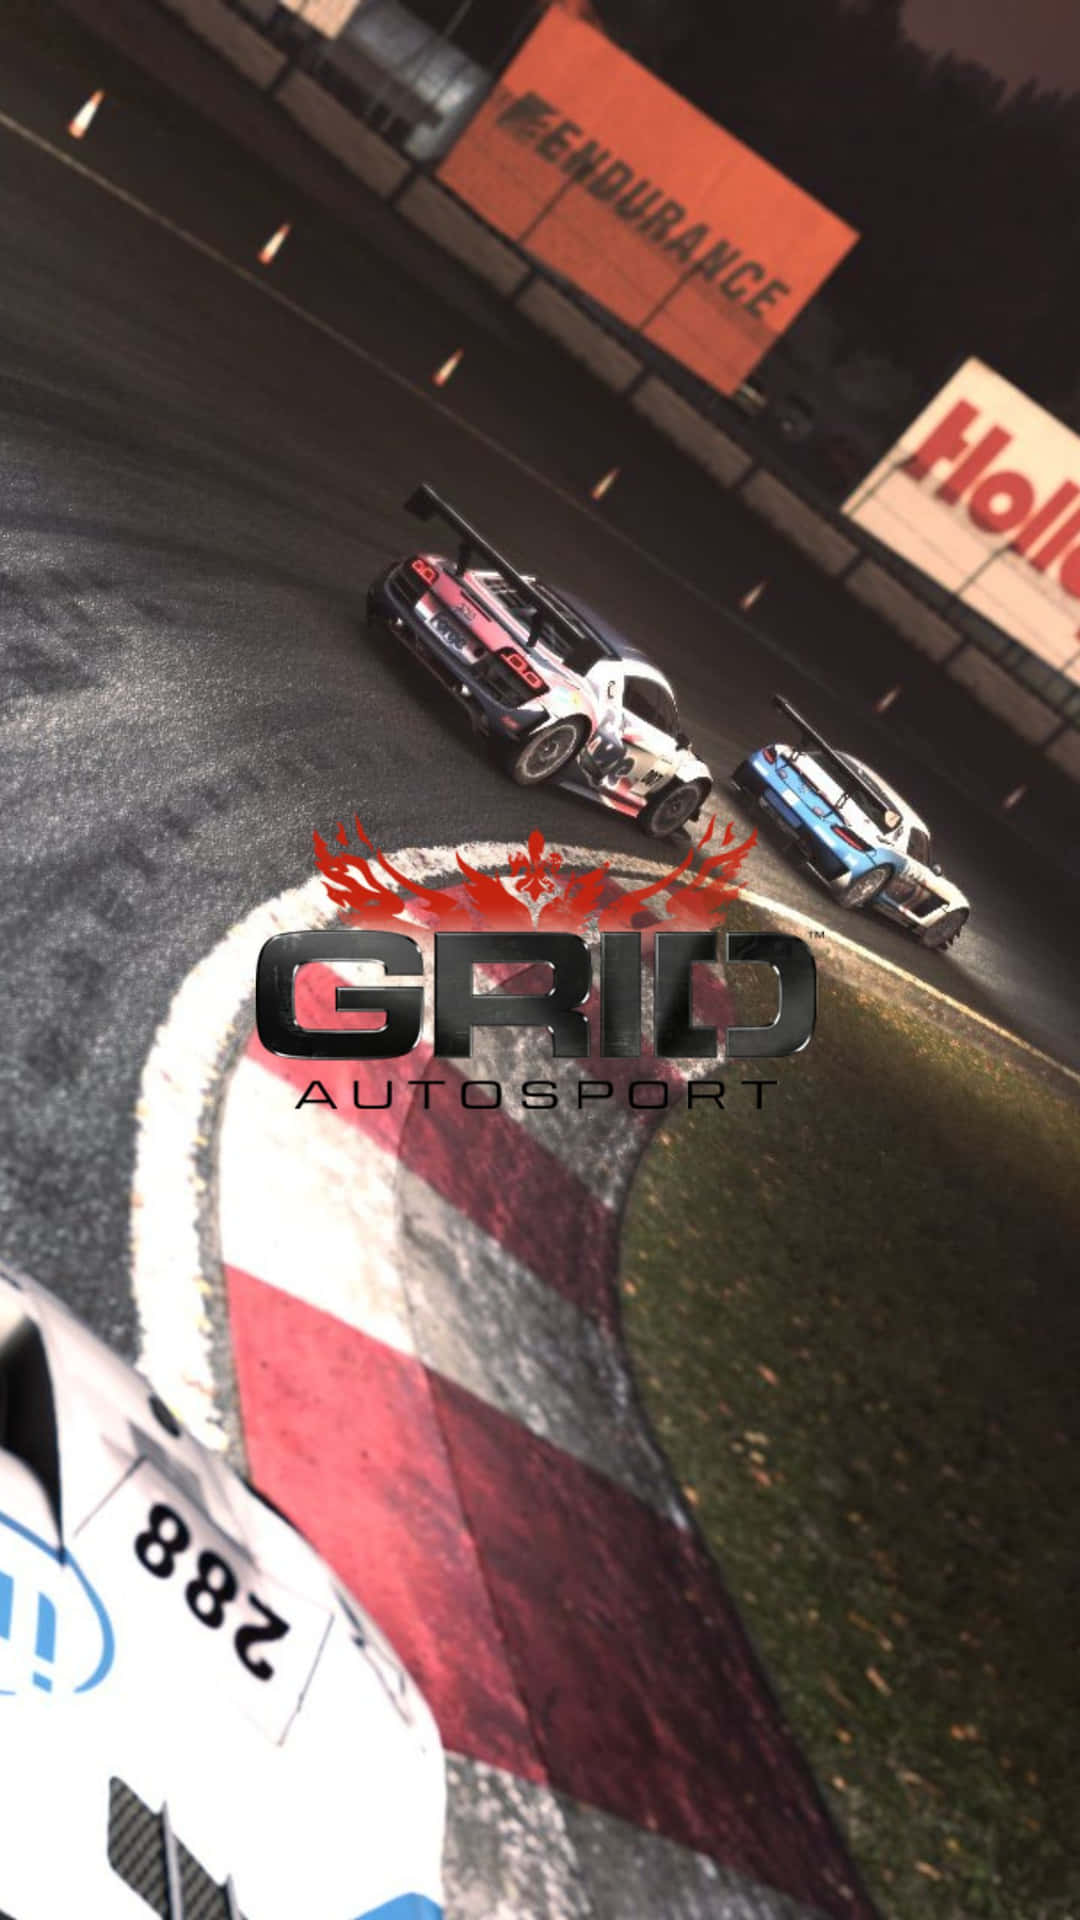 Experience The Thrill of Racing With Android Grid Autosport